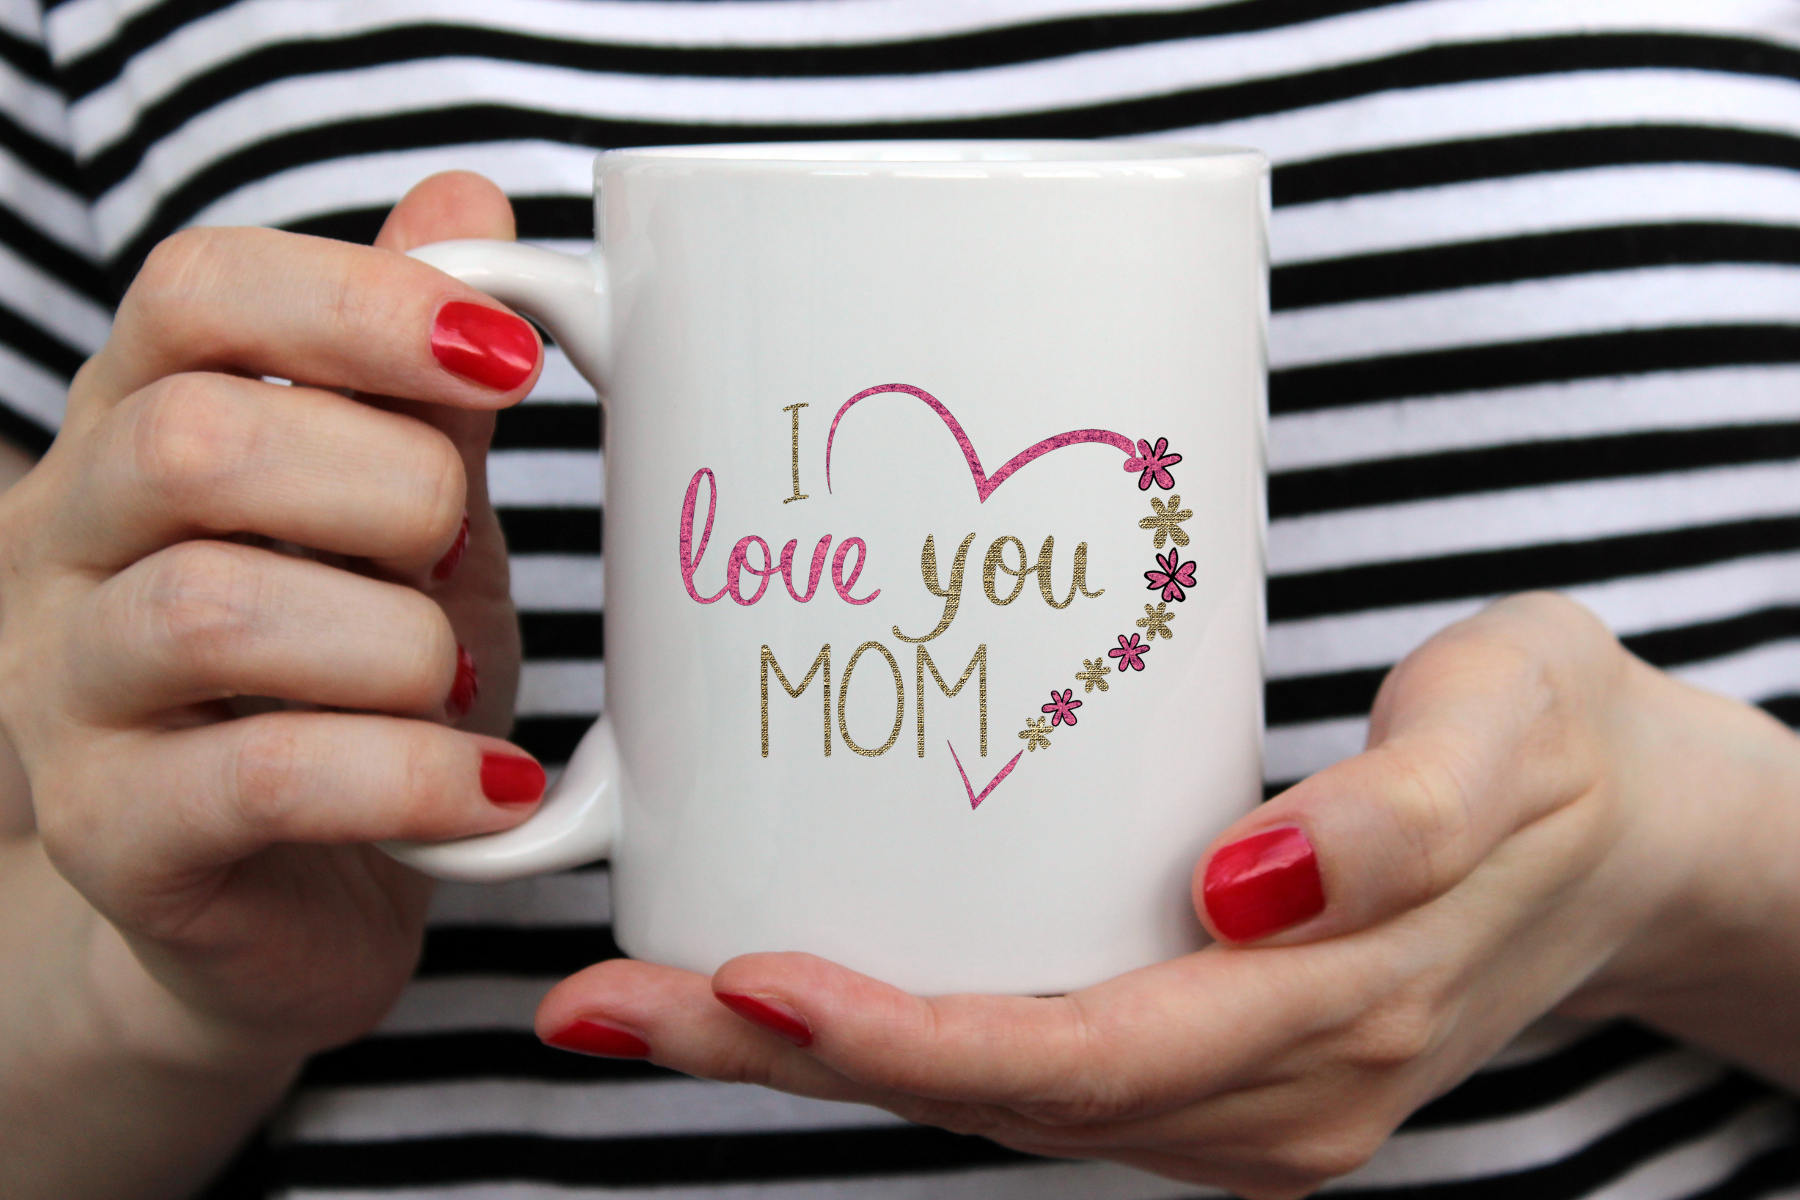 http://trendygearshop.com/wp-content/uploads/2019/12/happy-mothers-day-to-best-mom-ever-with-mothers-day-mug-gift-for-mom-from-daughter-or-from-son-gift-for-her-as-coffee-mug-is-1-mom-gift-5e078955.jpg